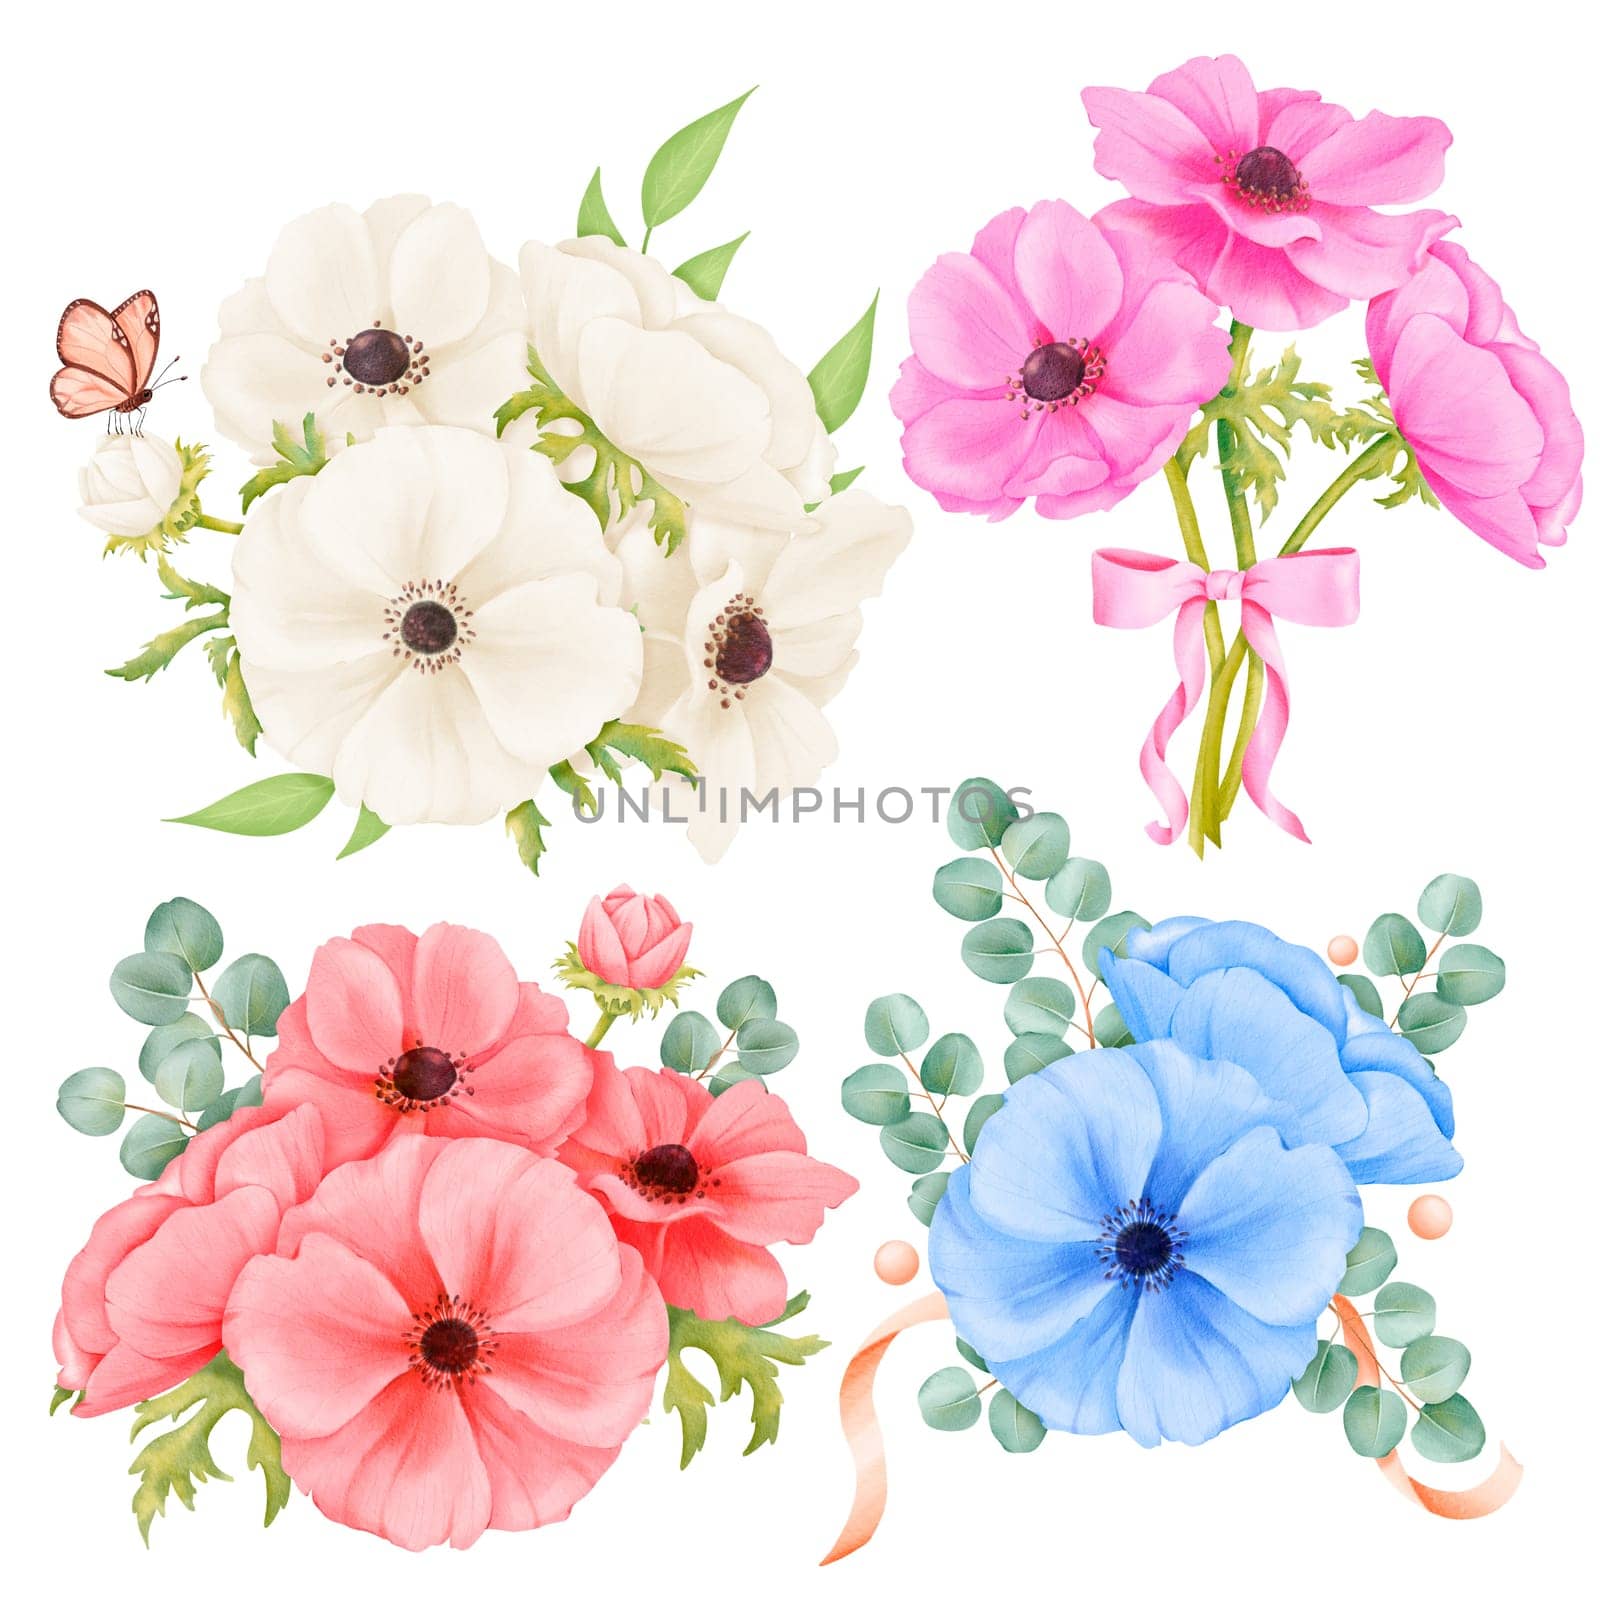 Watercolor set featuring anemone bouquets in various colors. adorned with satin ribbons, butterflies and eucalyptus sprigs. for wedding stationery, event invitations, floral designs backgrounds by Art_Mari_Ka